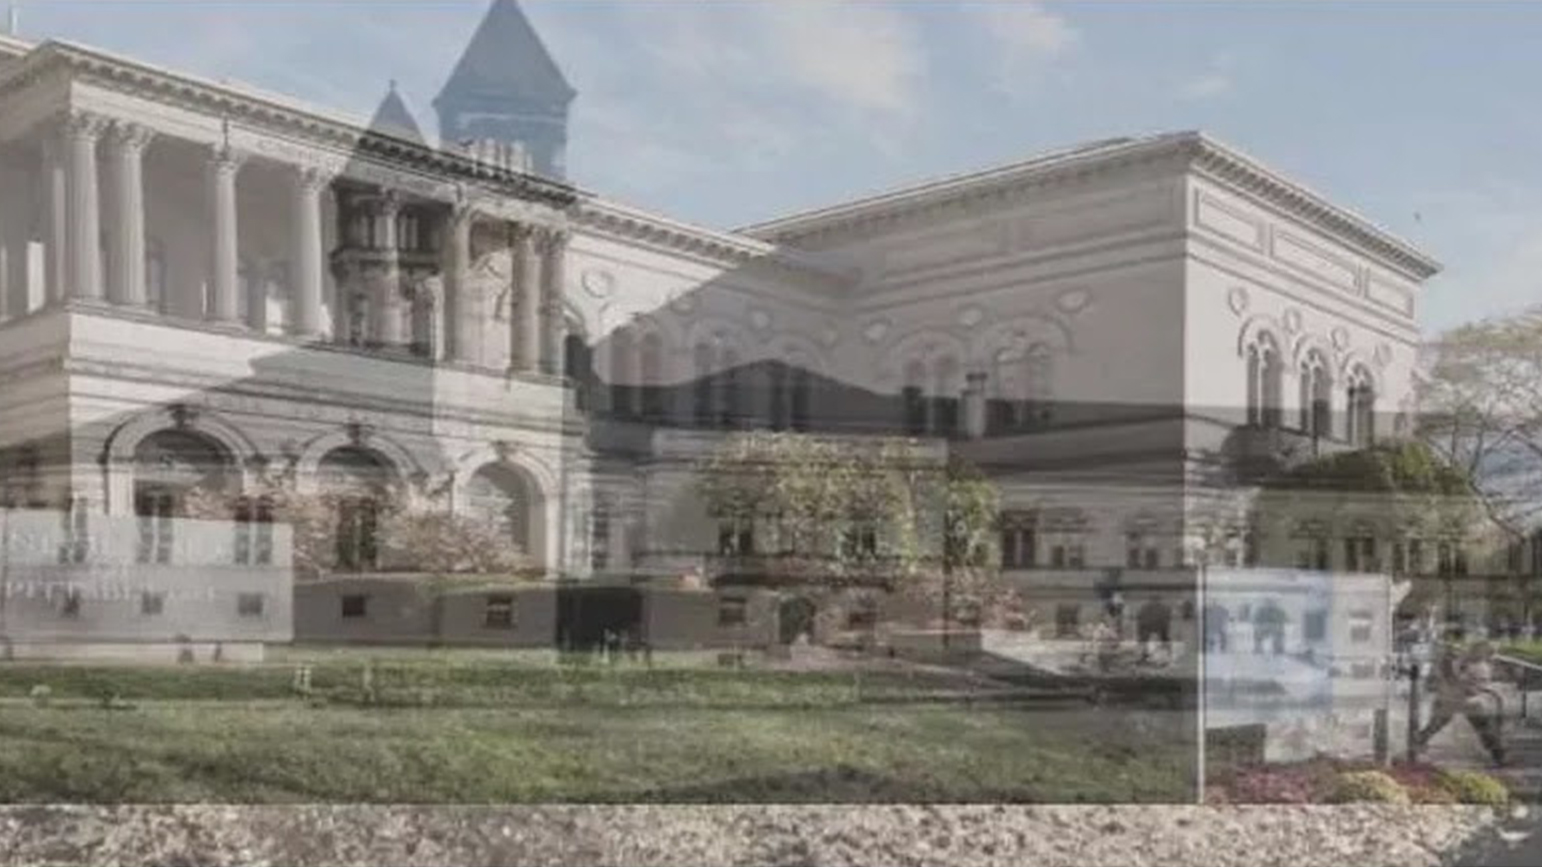 Photographs of the Carnegie Library of Pittsburgh superimposed on one another